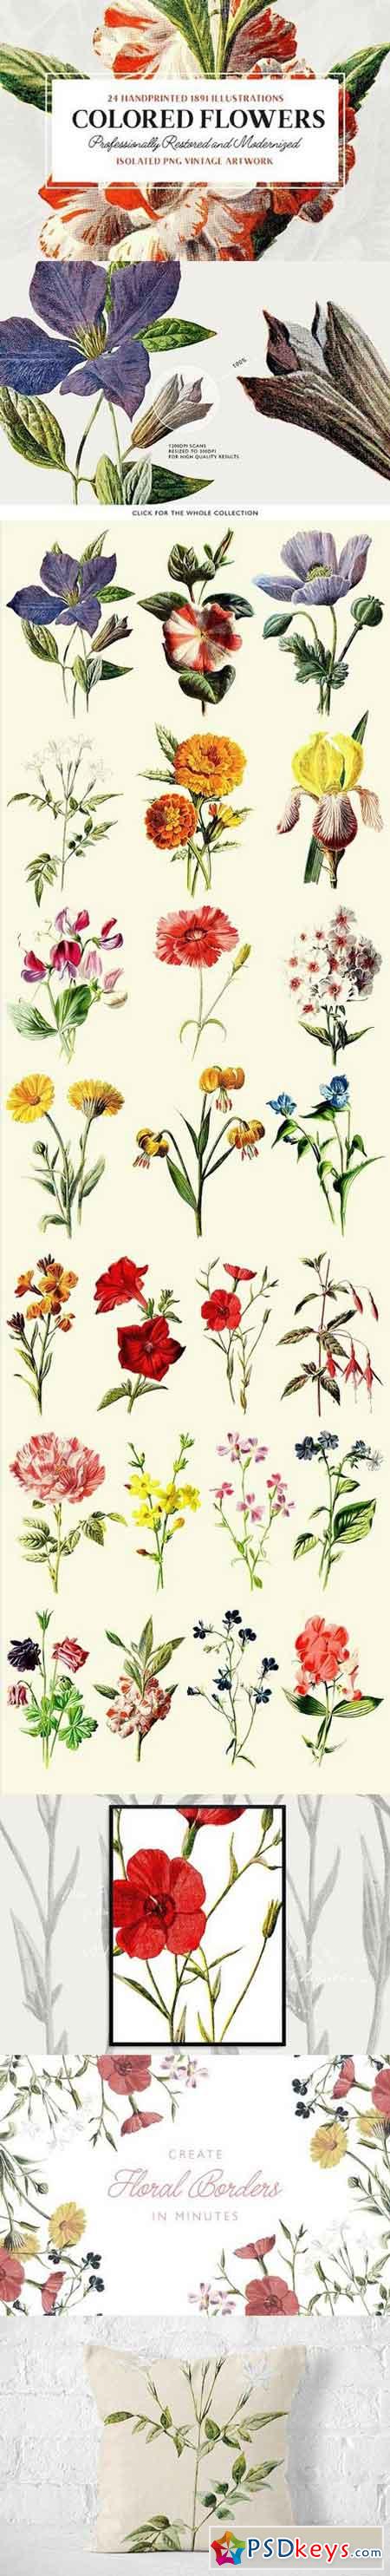 24 Colored Flower Illustrations 1157295